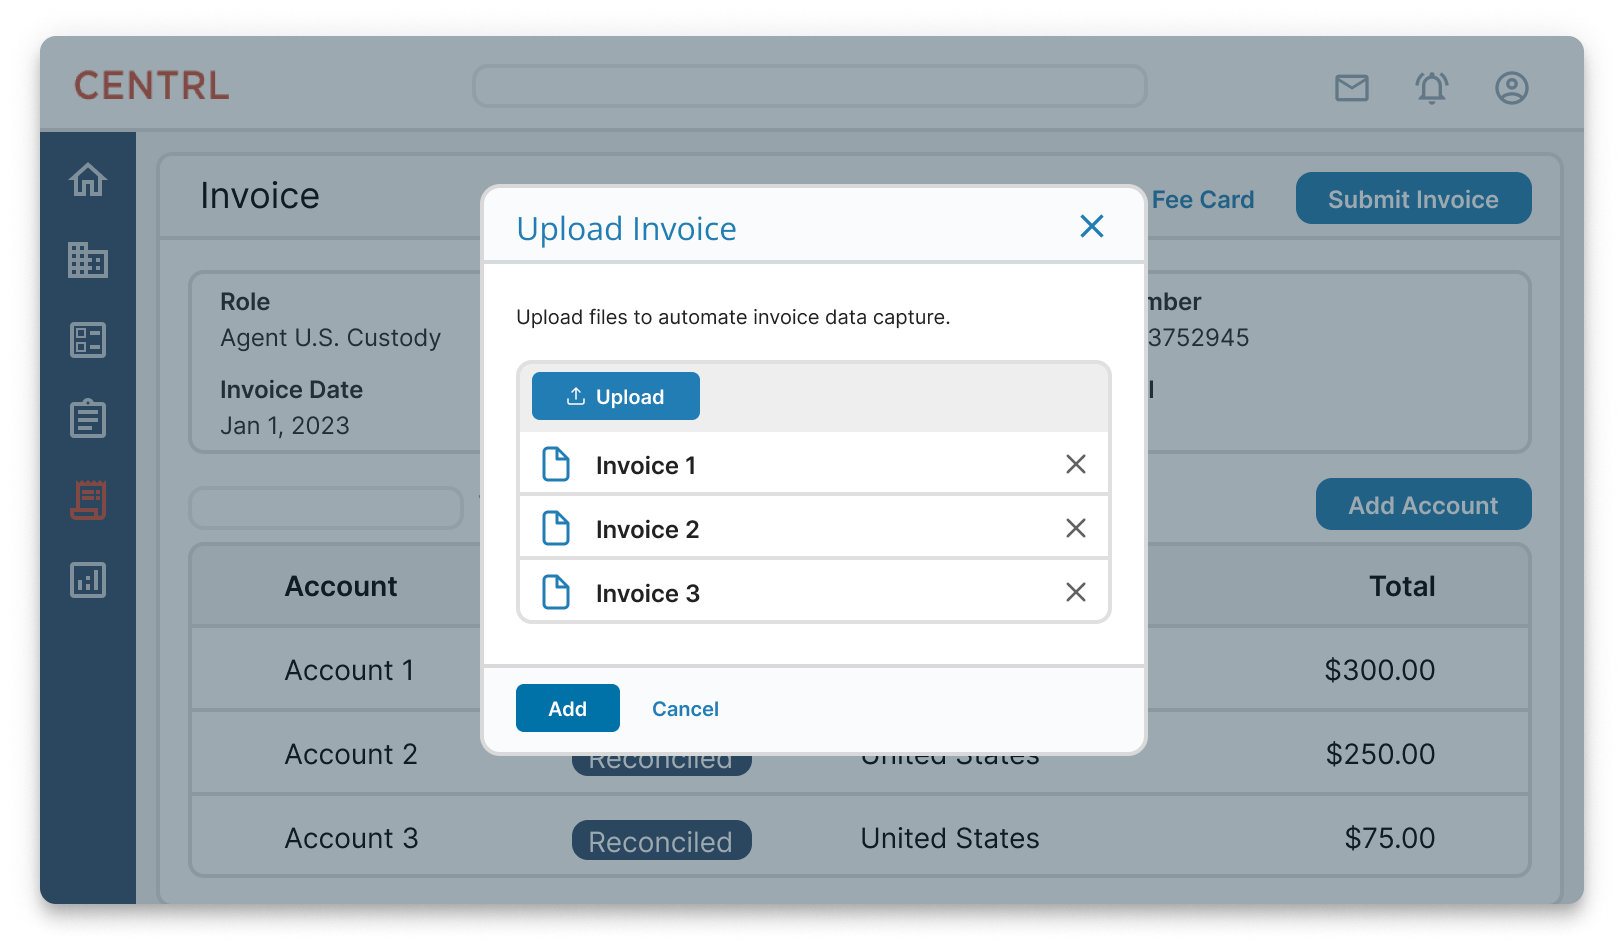 Automate invoice ingestion and dramatically reduce the time and effort it takes to enter invoices